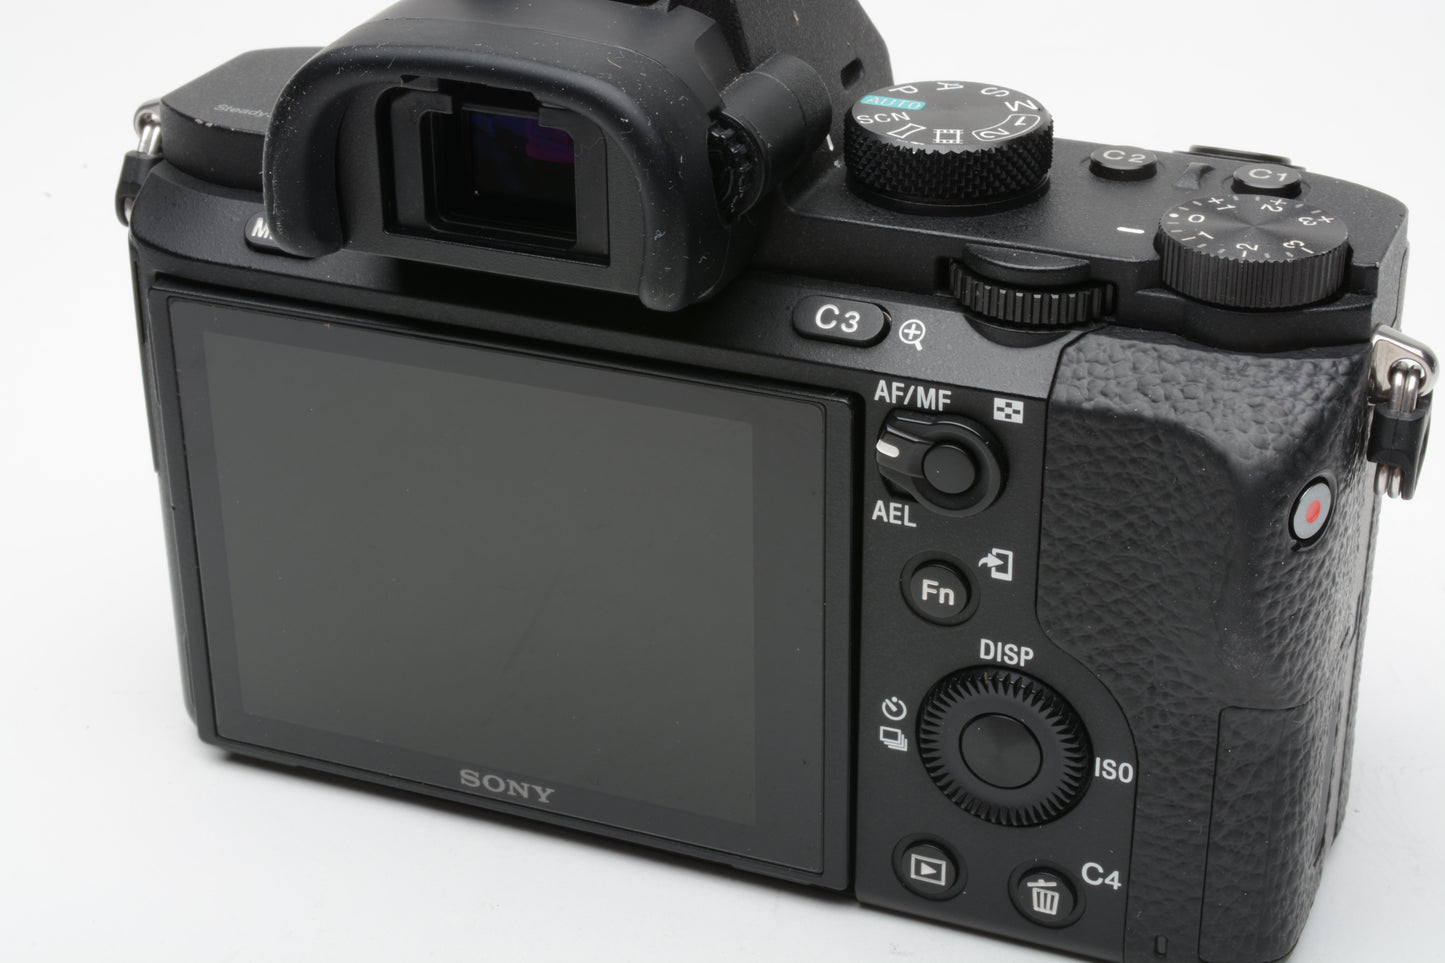 Sony A7 II Mirrorless Body, 3batts, charger, Only 9544 acts!  ILCE-7M2